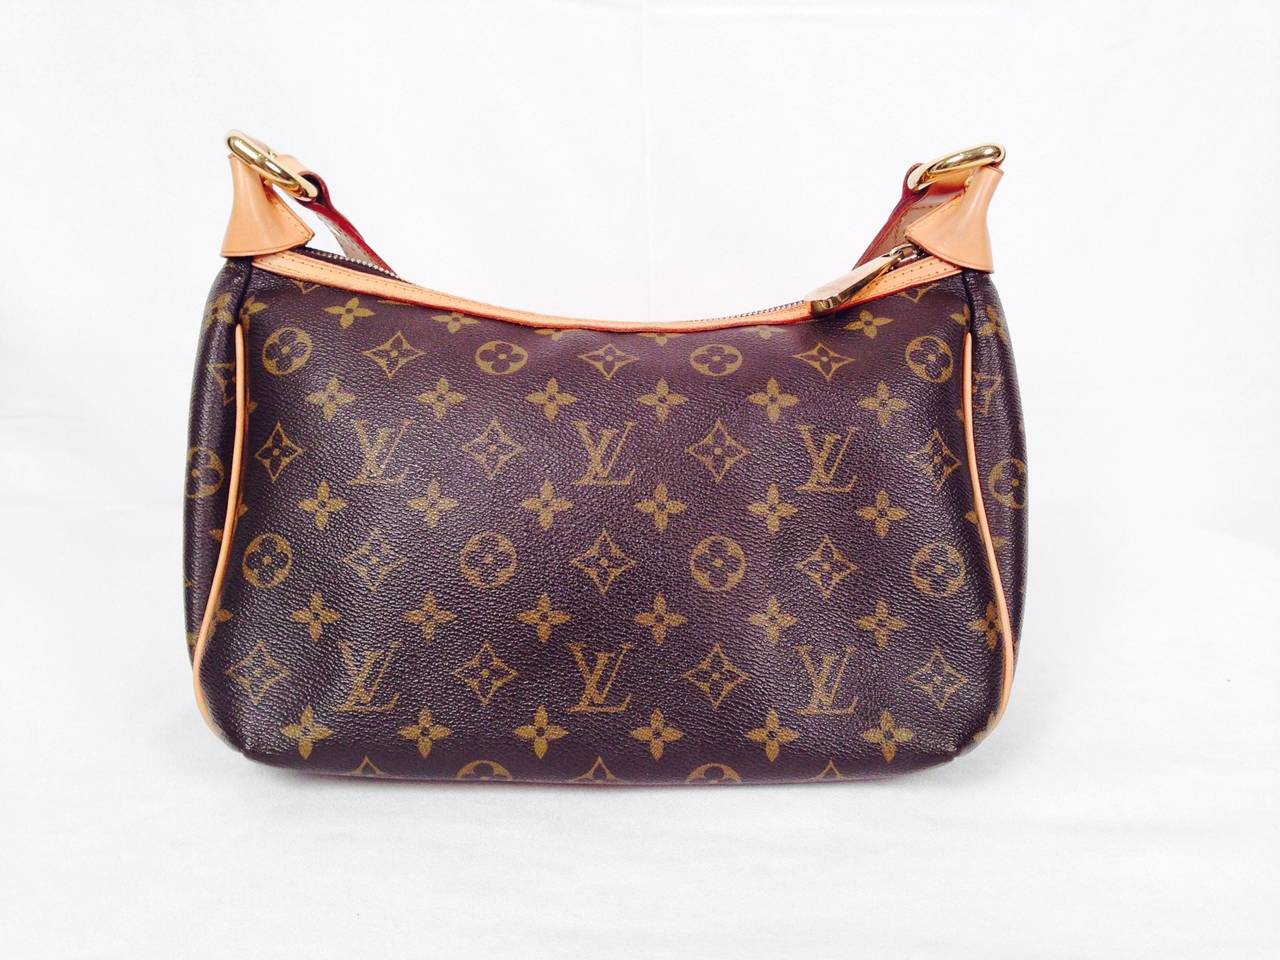 The largest member of the Tikal line has just arrived!  Triangular in shape, this Louis Vuitton Monogram Canvas Tikal GM will quickly become your favorite 